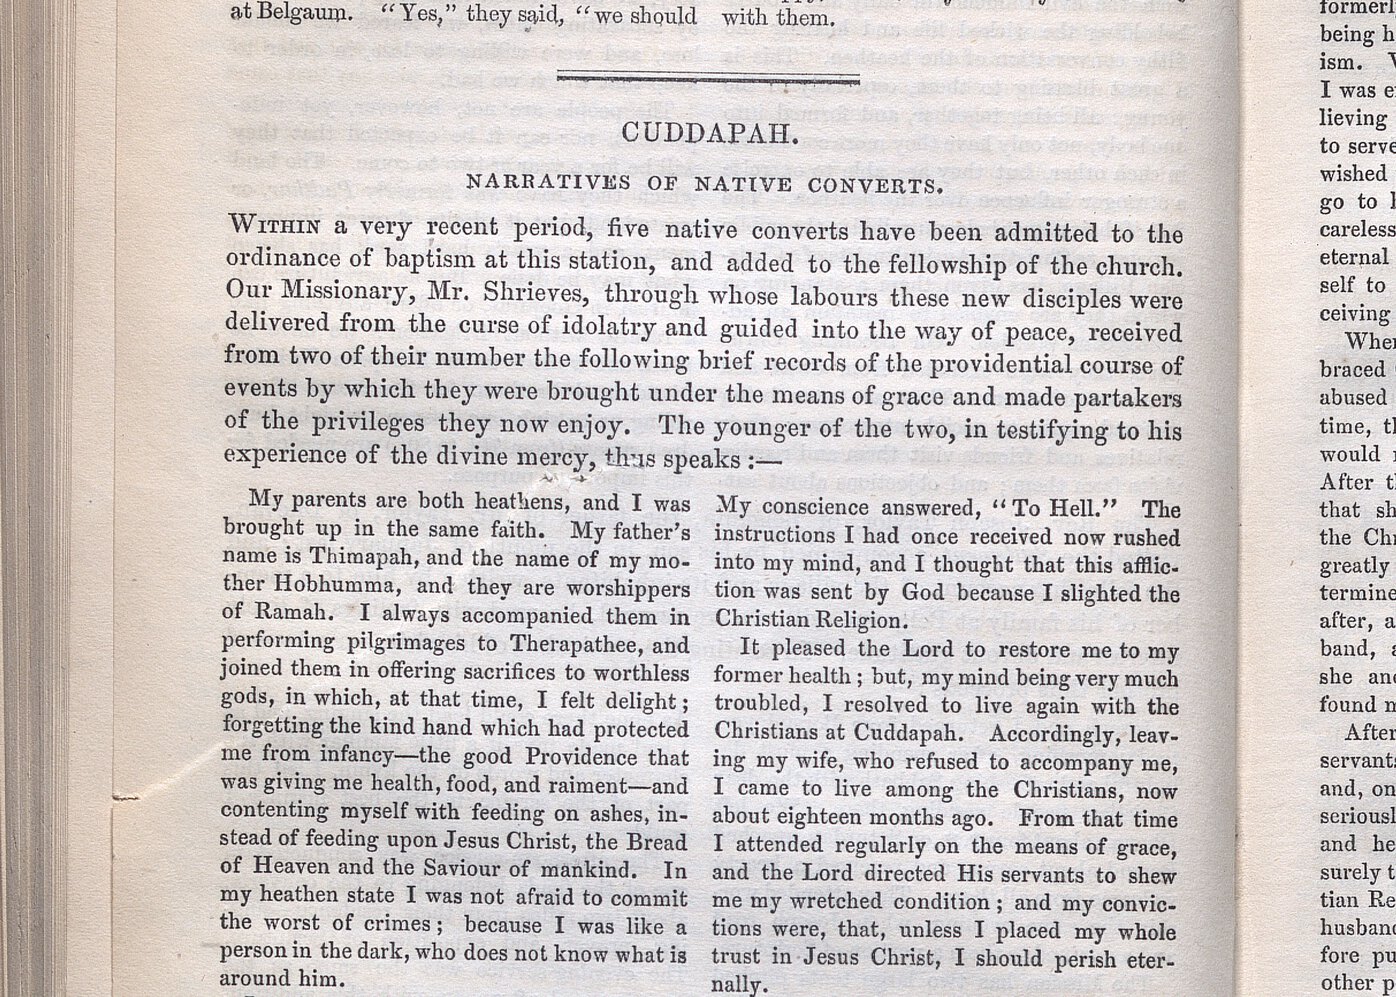 Page of periodical with title (“Cuddapah”), subtitle (“Narratives of Native Converts”), and text.